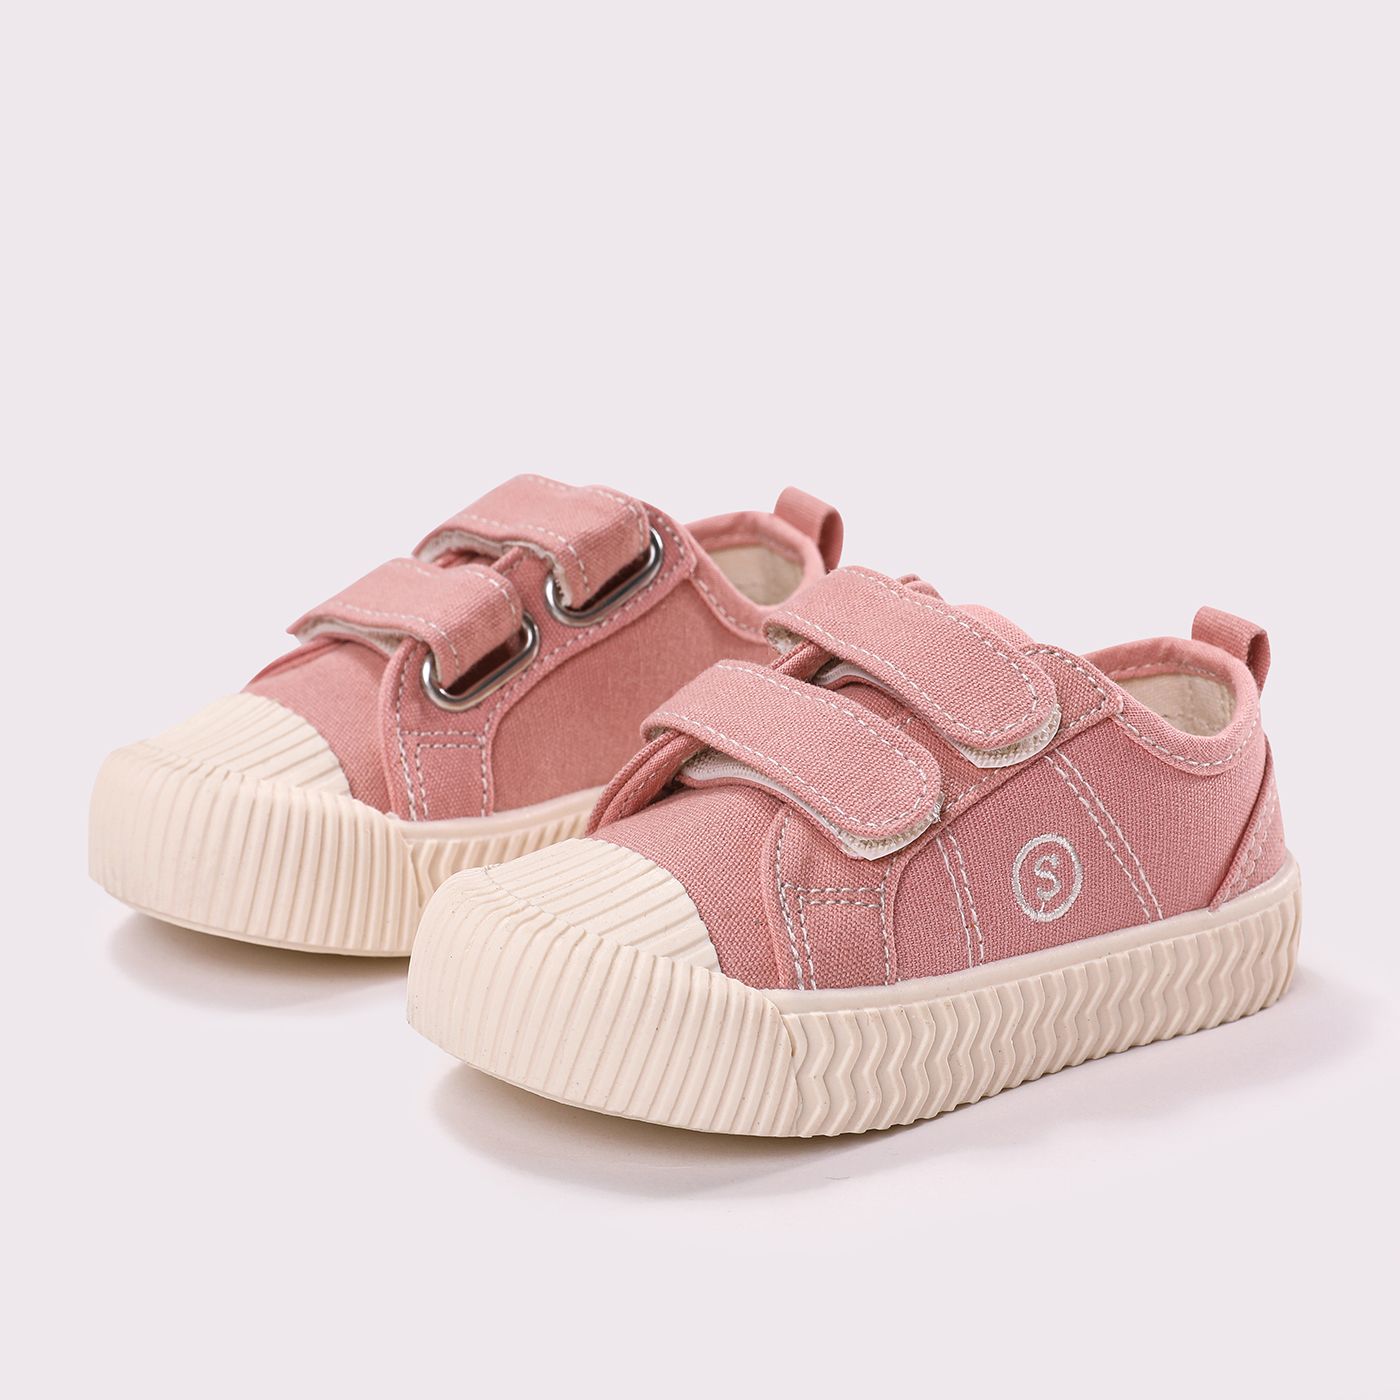 Toddler & Kids Velcro Casual Shoes